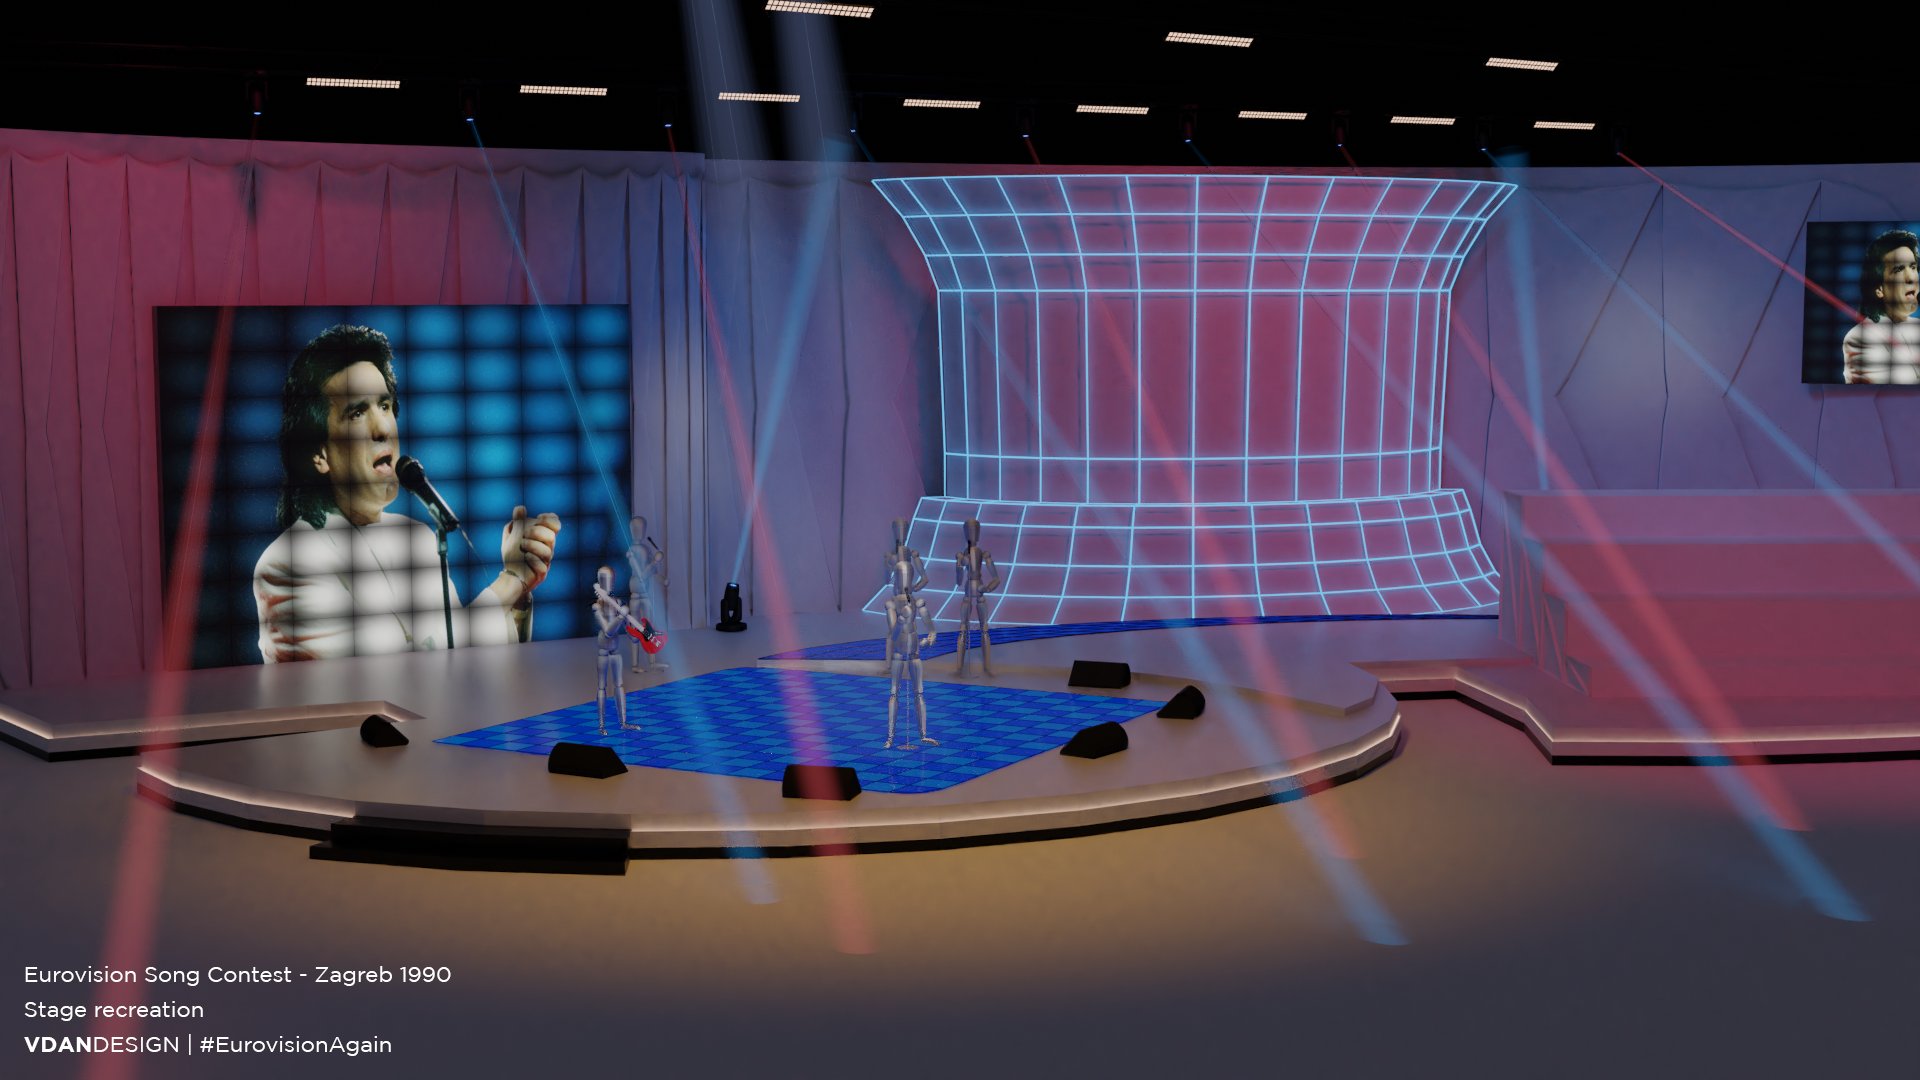 Dan | 🇸🇪🇫🇮🇦🇹 on Twitter: "Voting has begun, and therefore, it's time  to post the stage recreation! This month, of the 1990 #Eurovision stage in  Zagreb. Feedback is as always much appreciated:) #